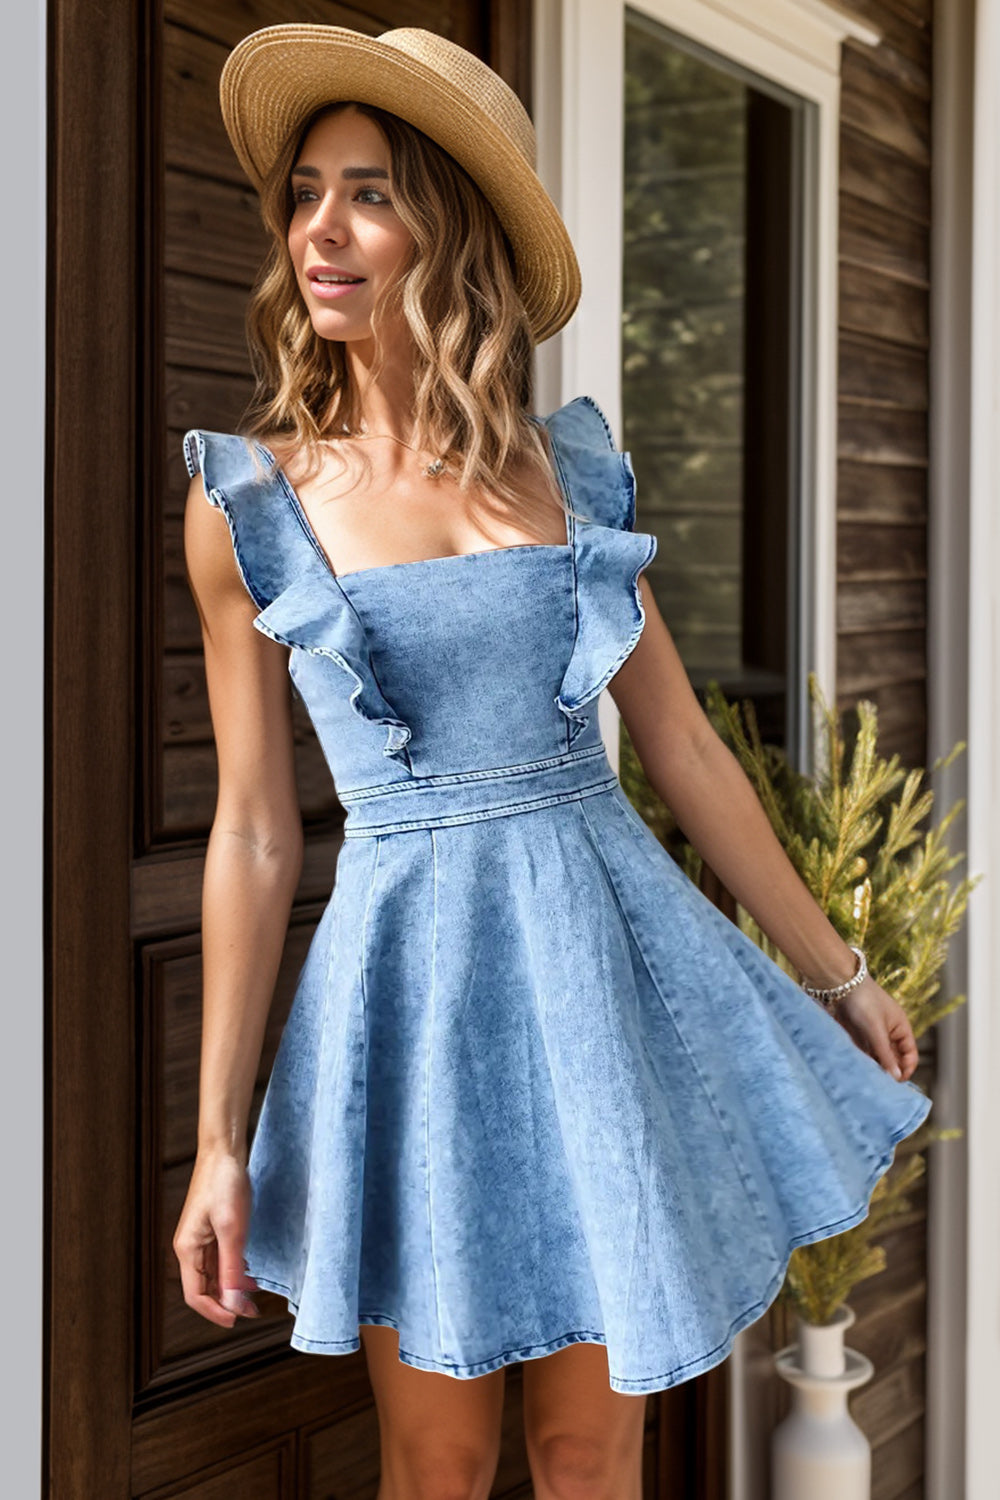 A woman stands confidently in a light blue ruffled mini dress with a square neckline, embodying a blend of casual elegance and youthful charm.